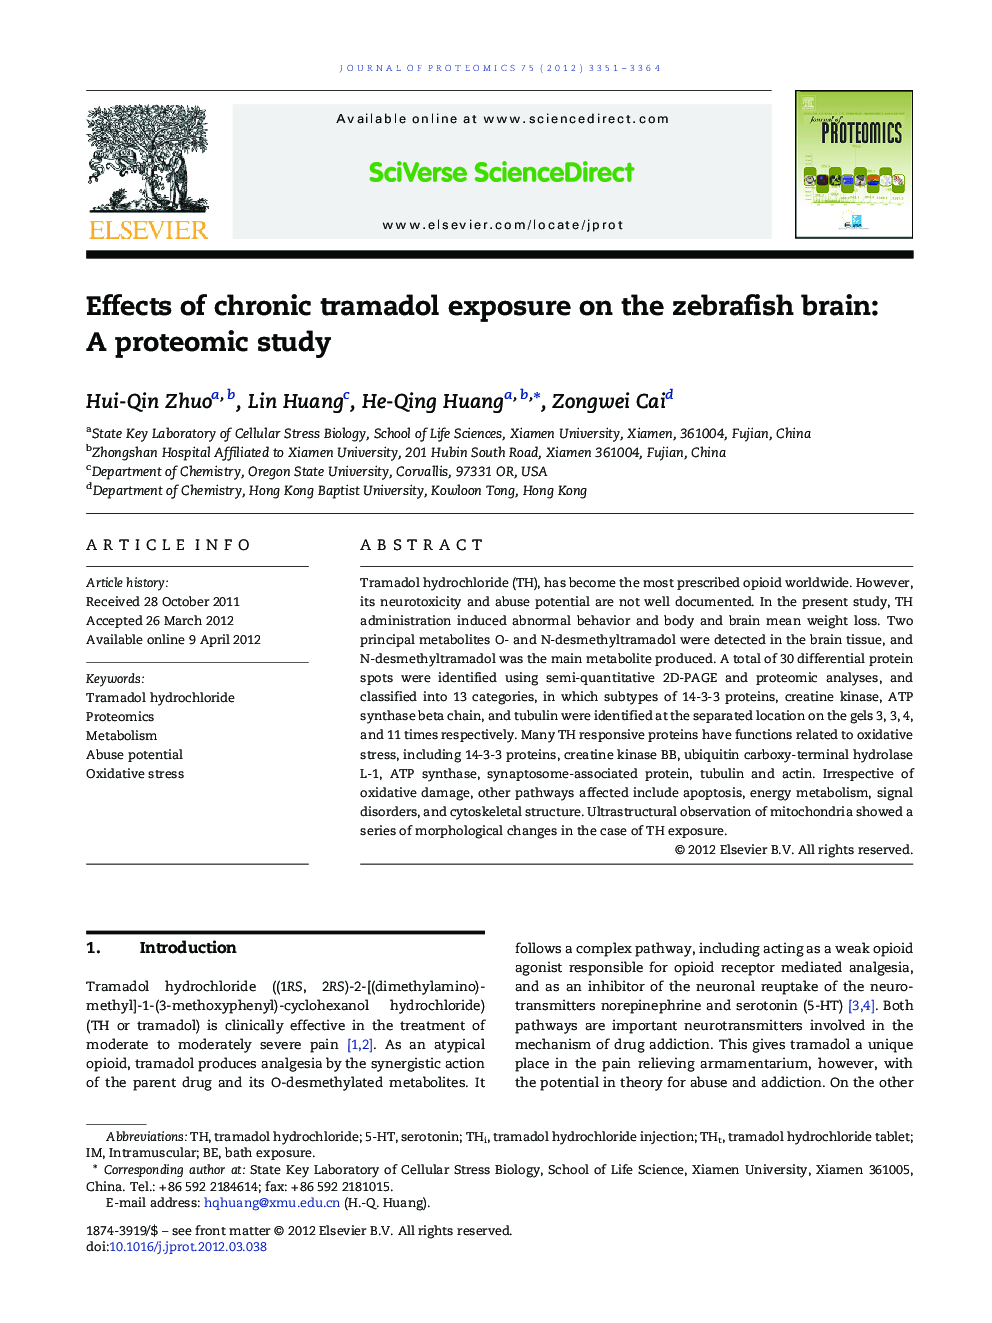 Effects of chronic tramadol exposure on the zebrafish brain: A proteomic study